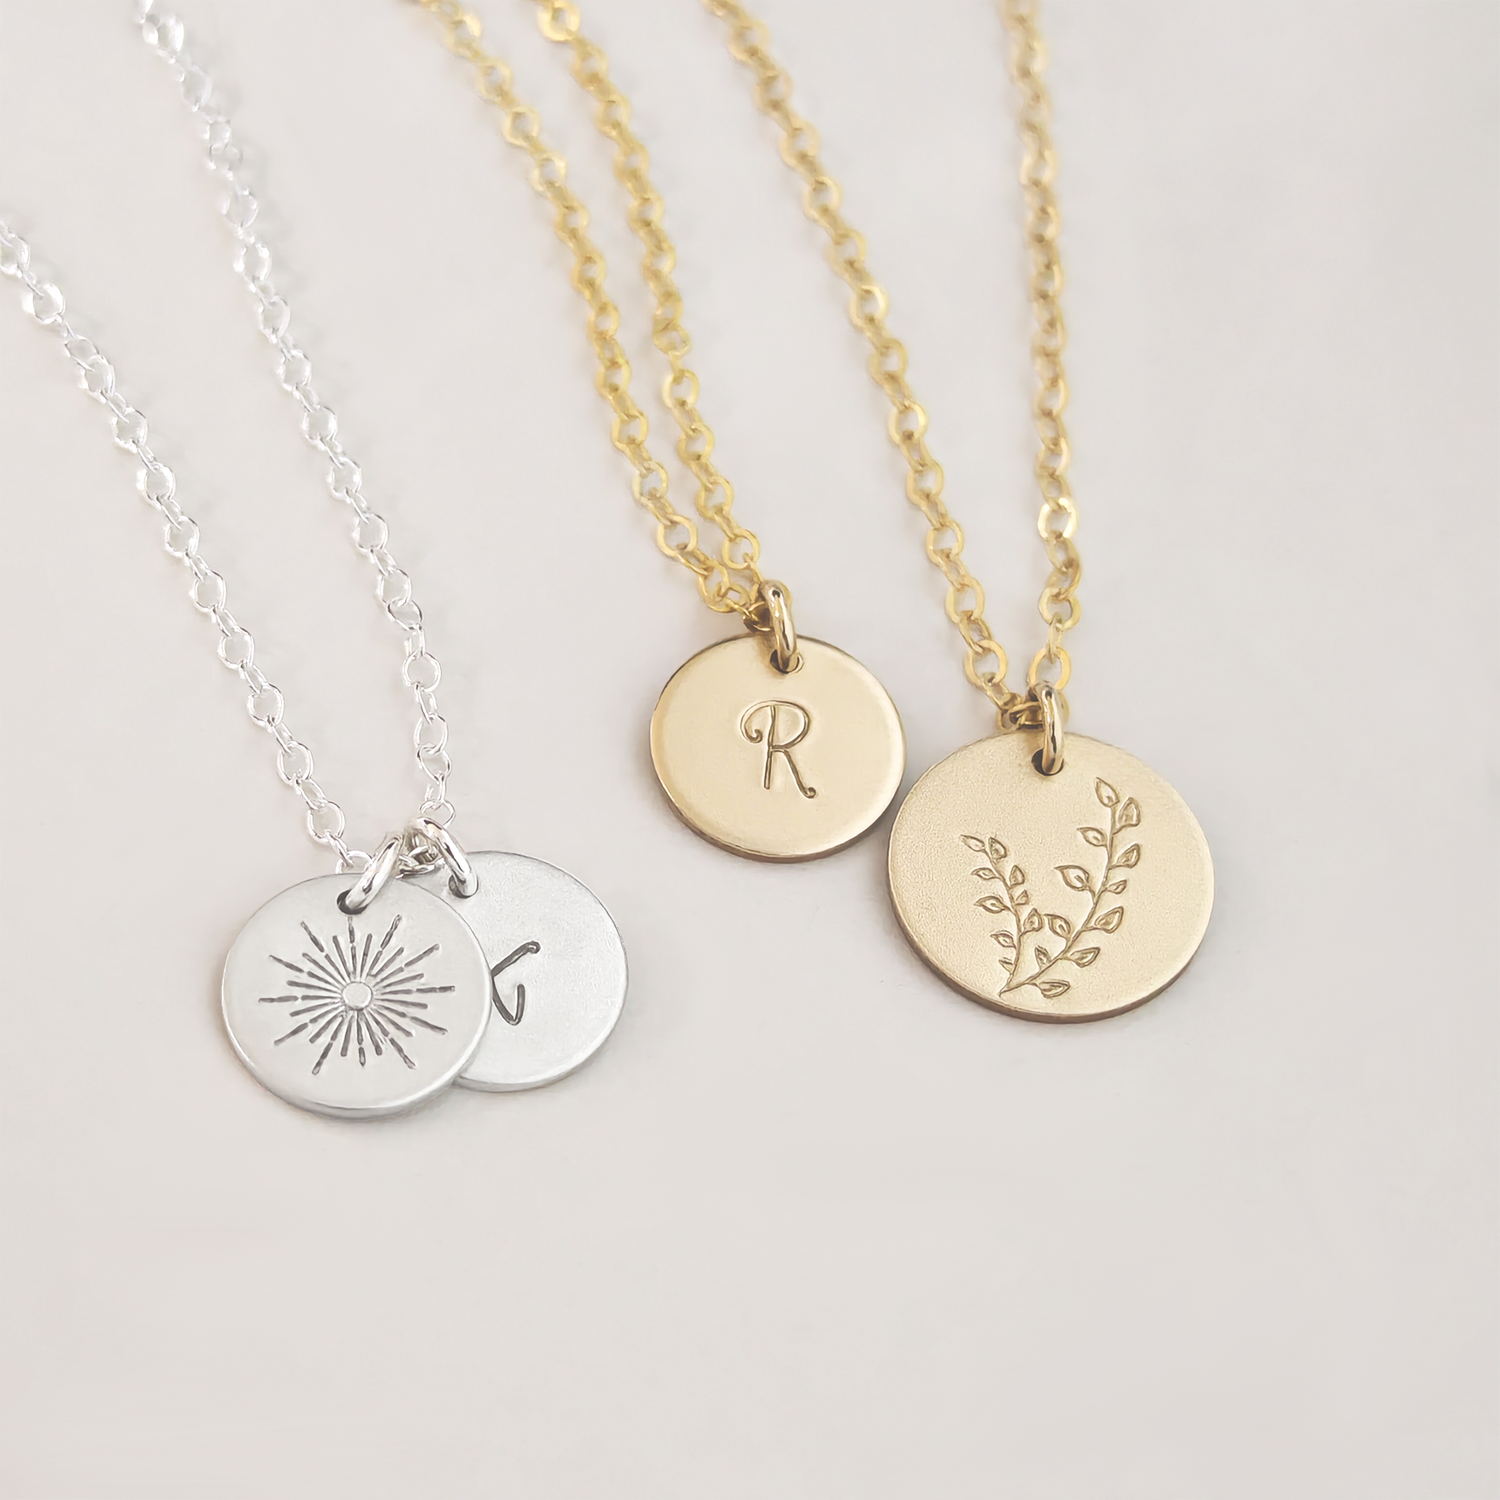 Personalized Celestial Silver Necklace